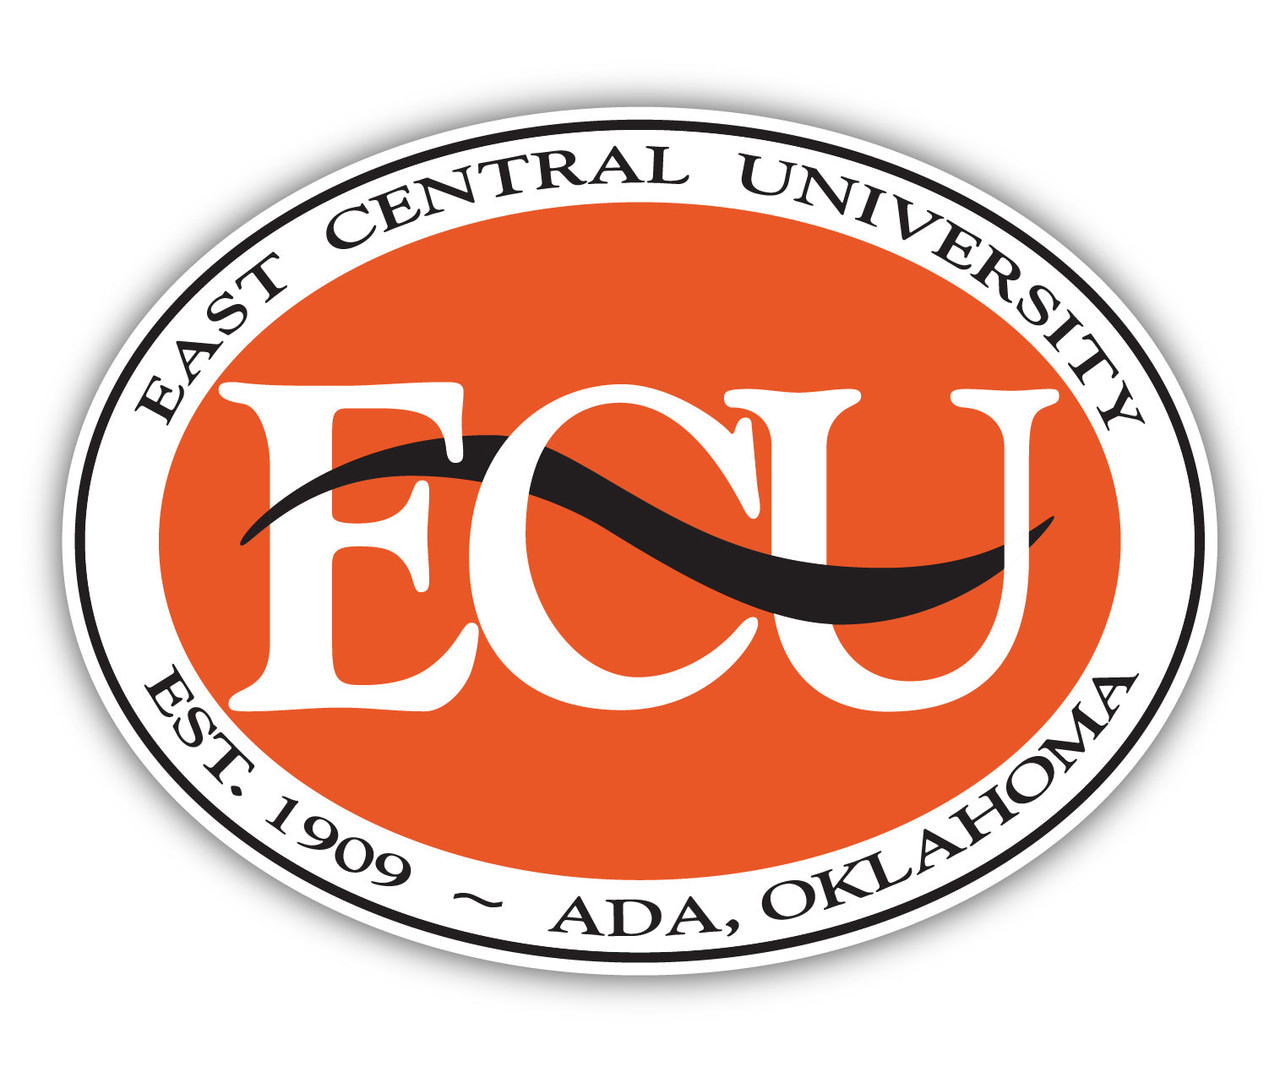 East Central University Tigers 12 Inch Vinyl Decal Sticker